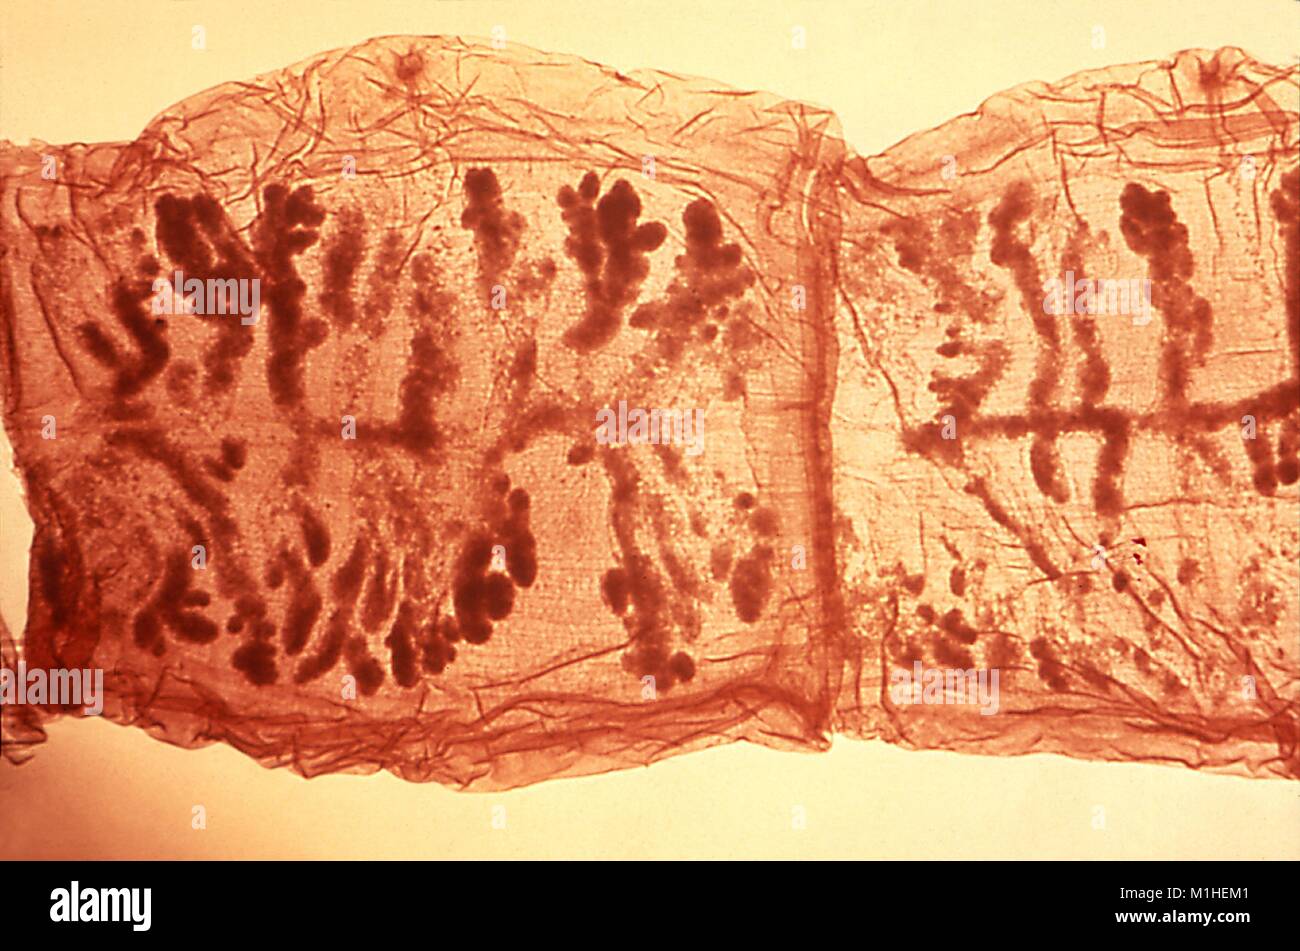 Tapeworm proglottids (Taenia solium) organ morphology revealed in the micrograph film, 1986. Image courtesy Centers for Disease Control (CDC). () Stock Photo